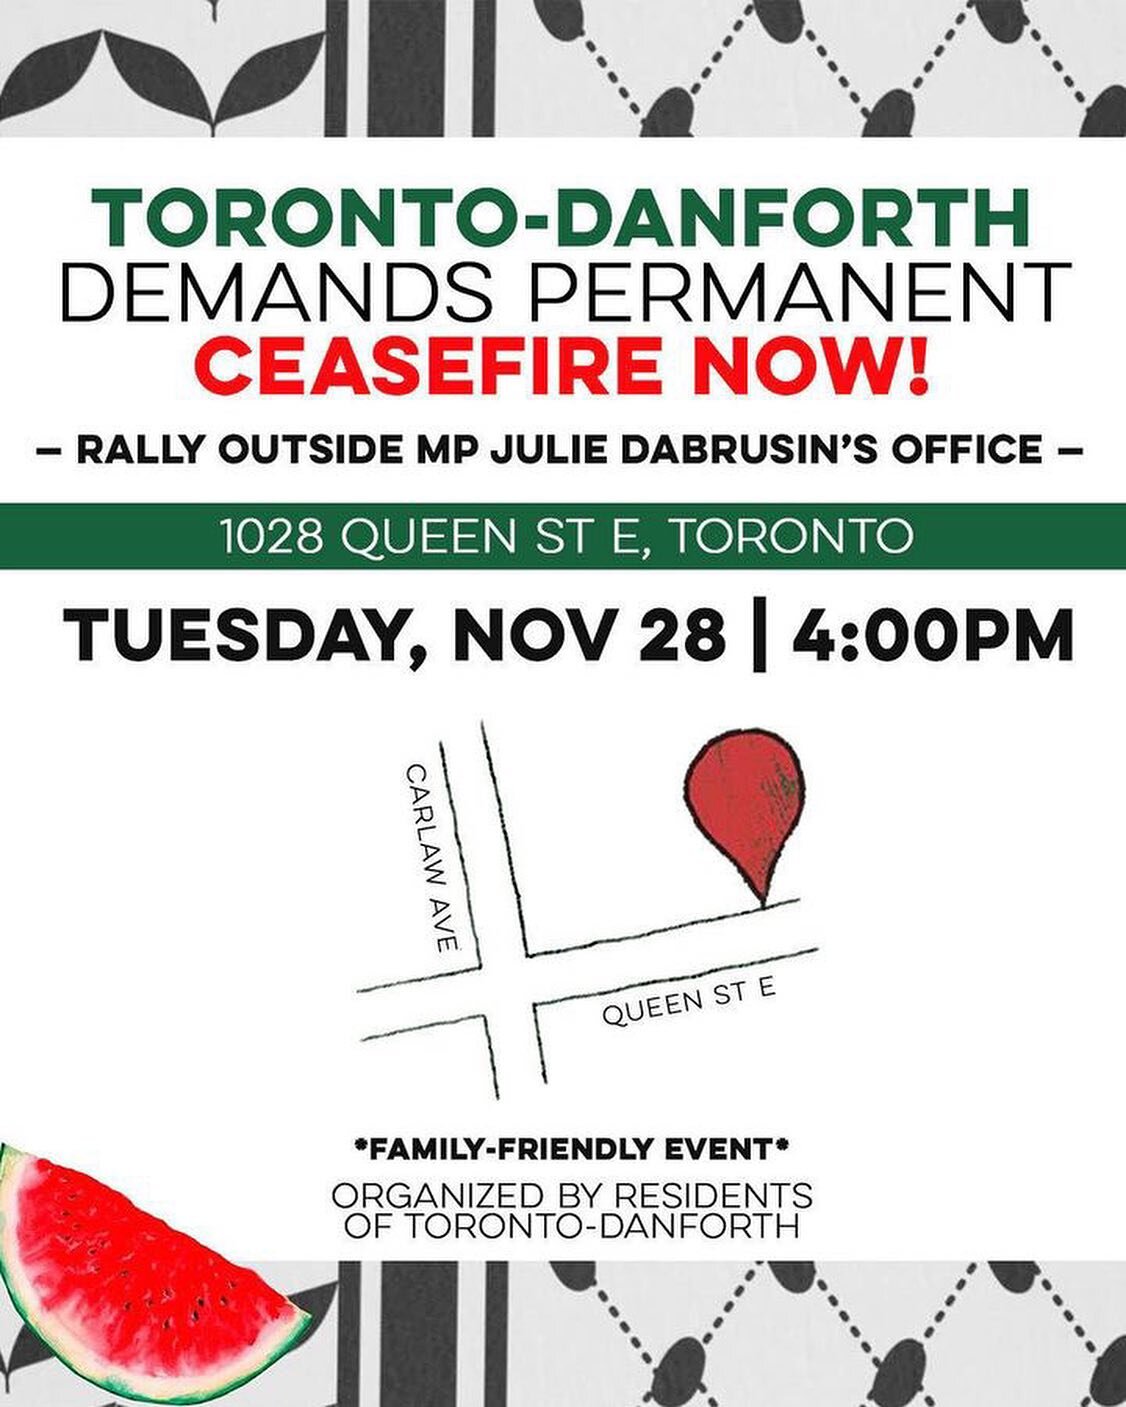 From Davenport to Danforth! 🤩 Another group of Toronto residents has been organizing to pressure their MP to call for a permanent ceasefire! WE LOVE TO SEE IT ✊

East-enders! Join on Tuesday at 4PM at Julie Dabrusin&rsquo;s office, 1028 Queen St E! 